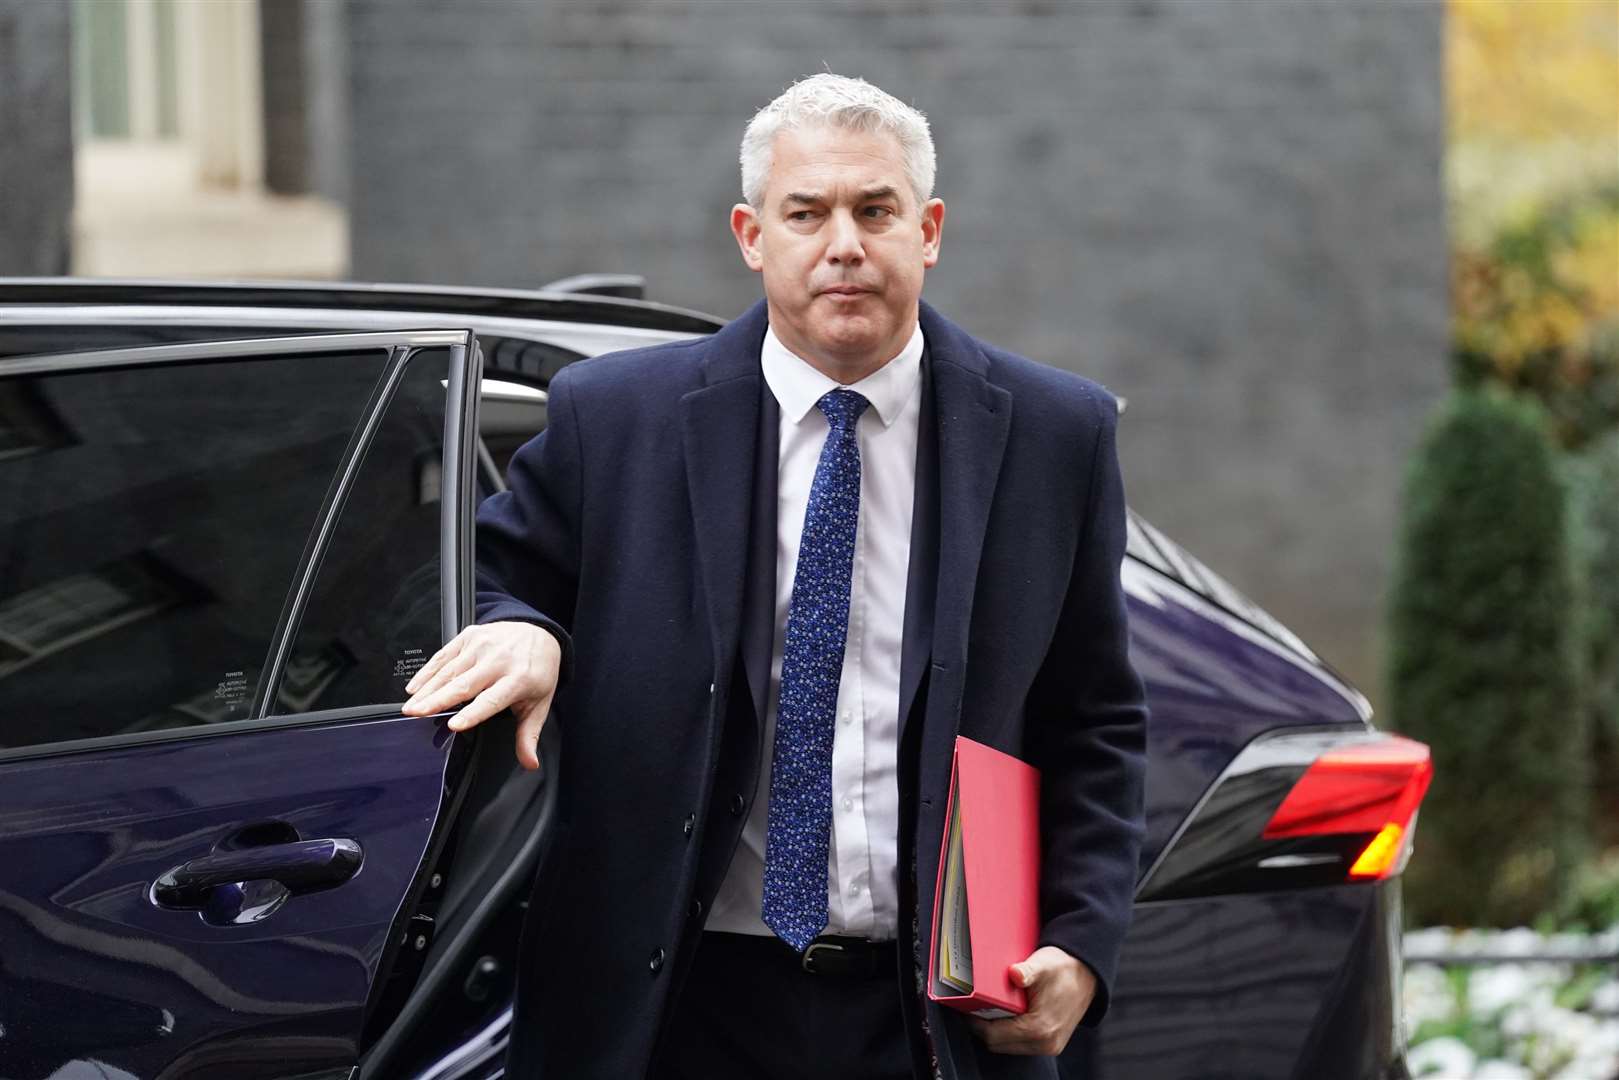 The Royal College of Nursing (RCN) said strikes would go ahead after Health Secretary Steve Barclay refused to discuss pay (Stefan Rousseau/PA)